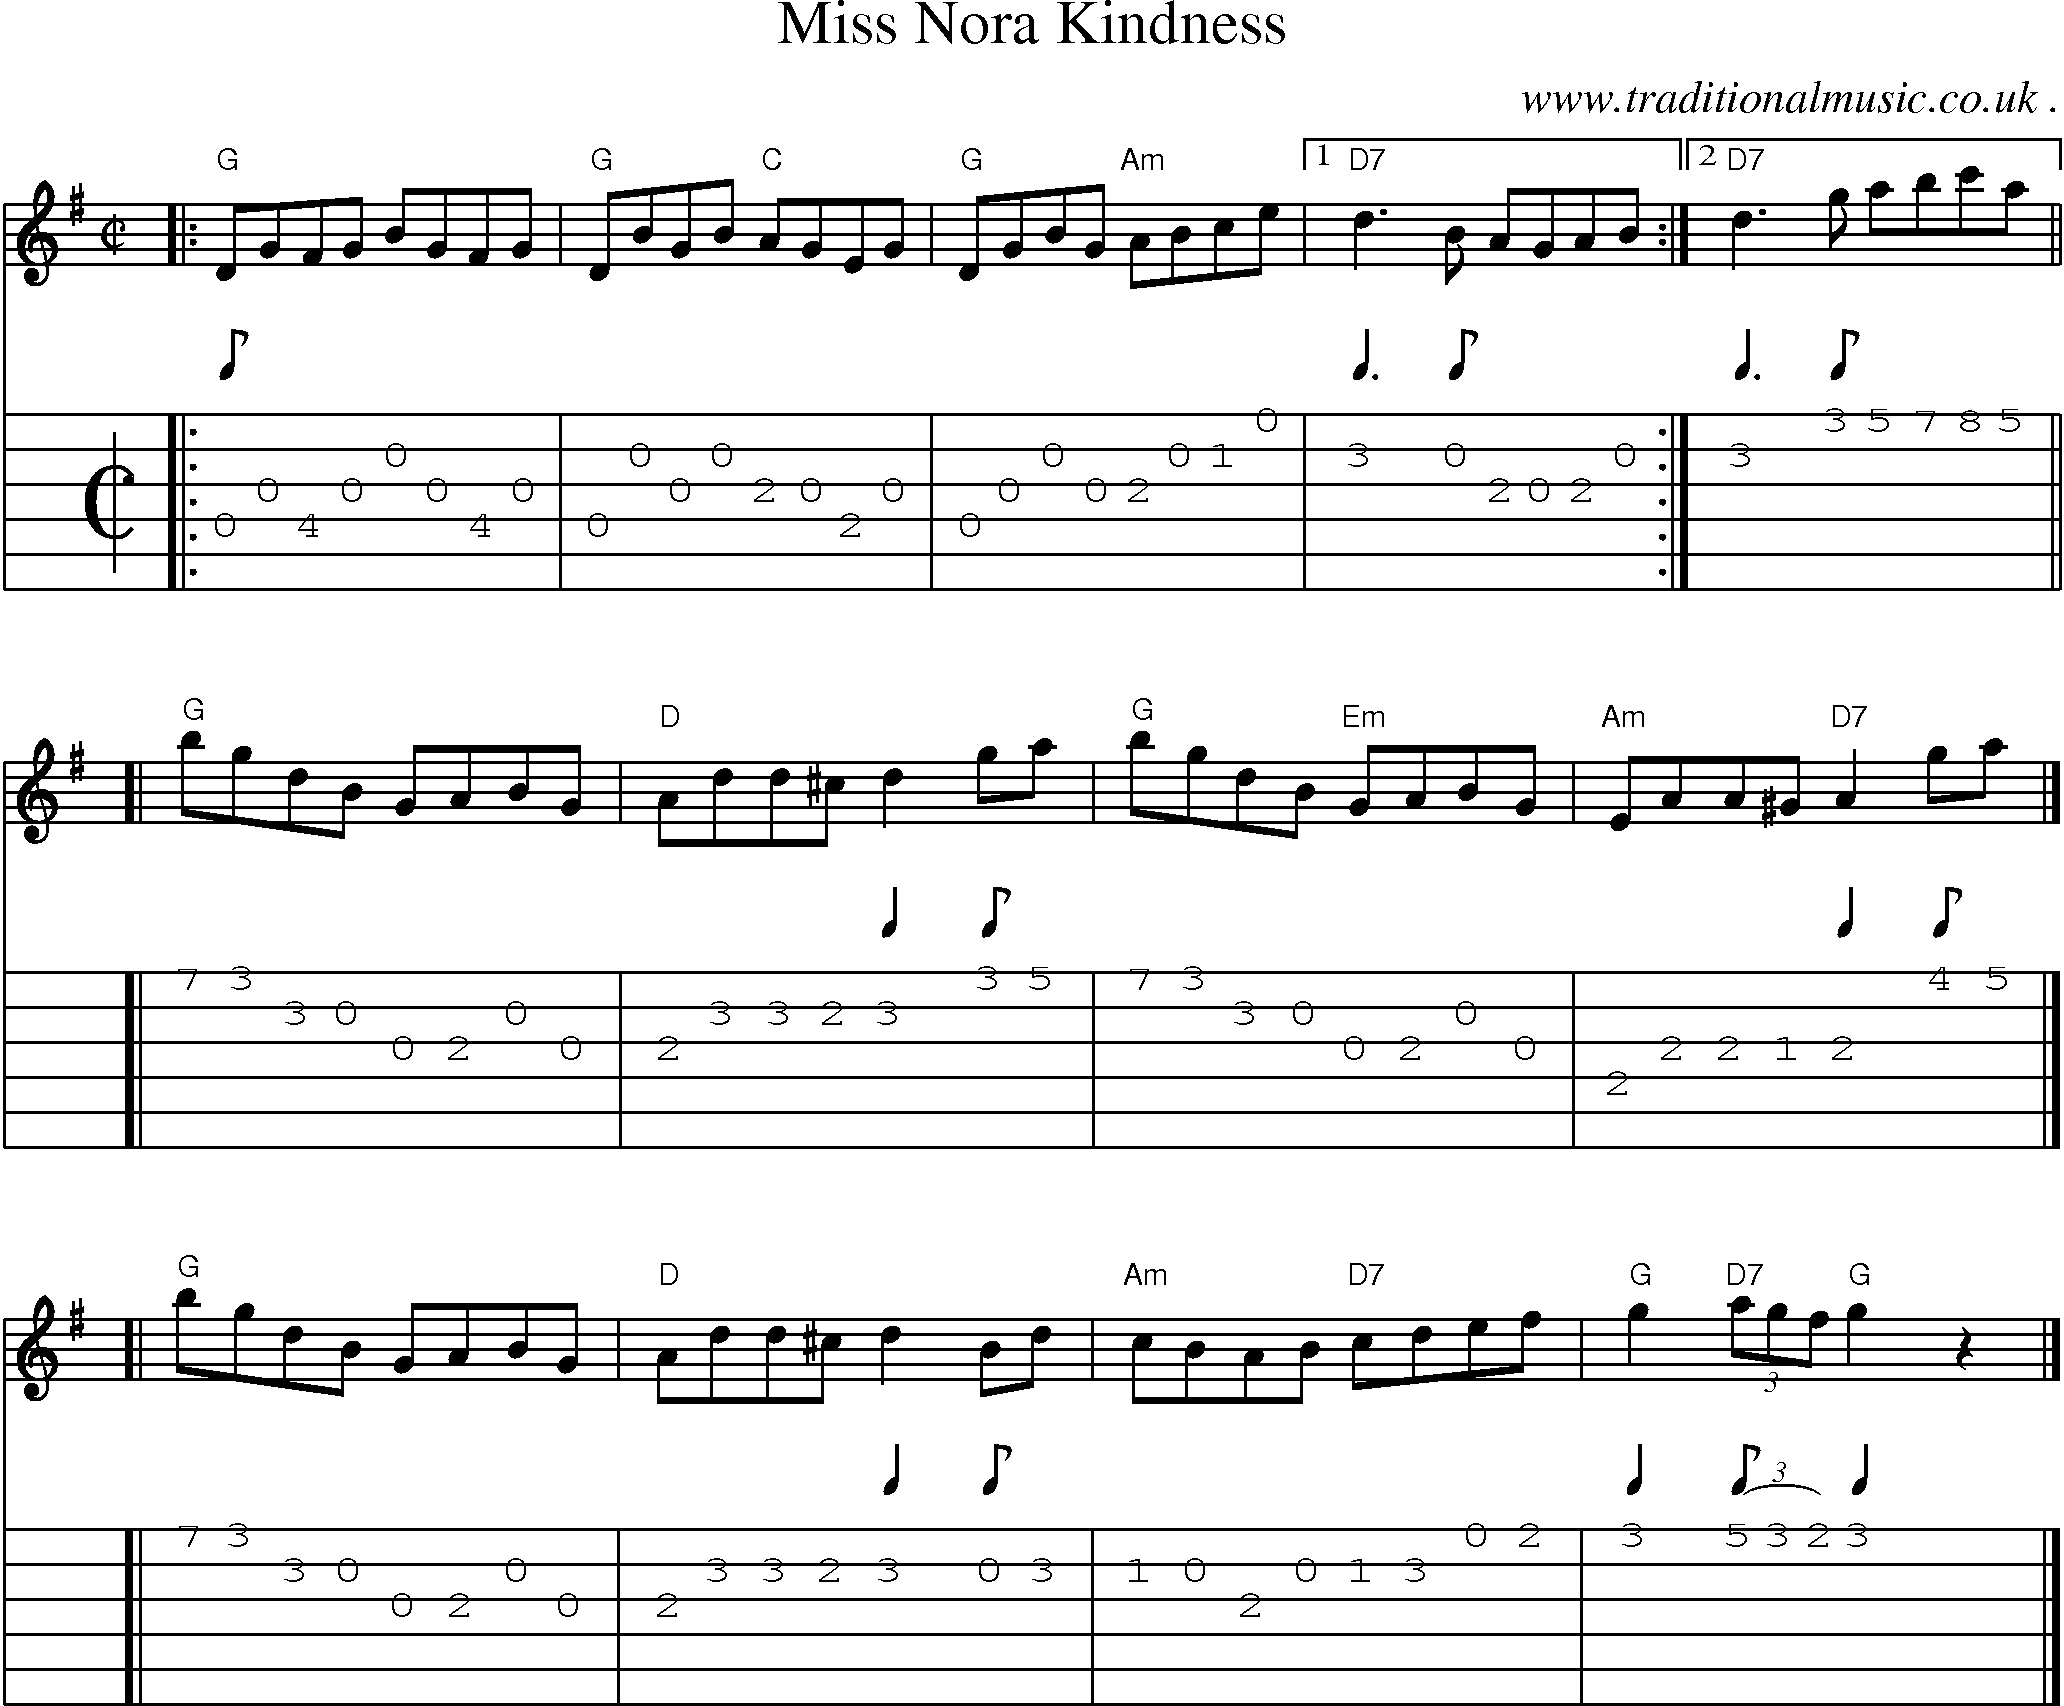 Sheet-music  score, Chords and Guitar Tabs for Miss Nora Kindness